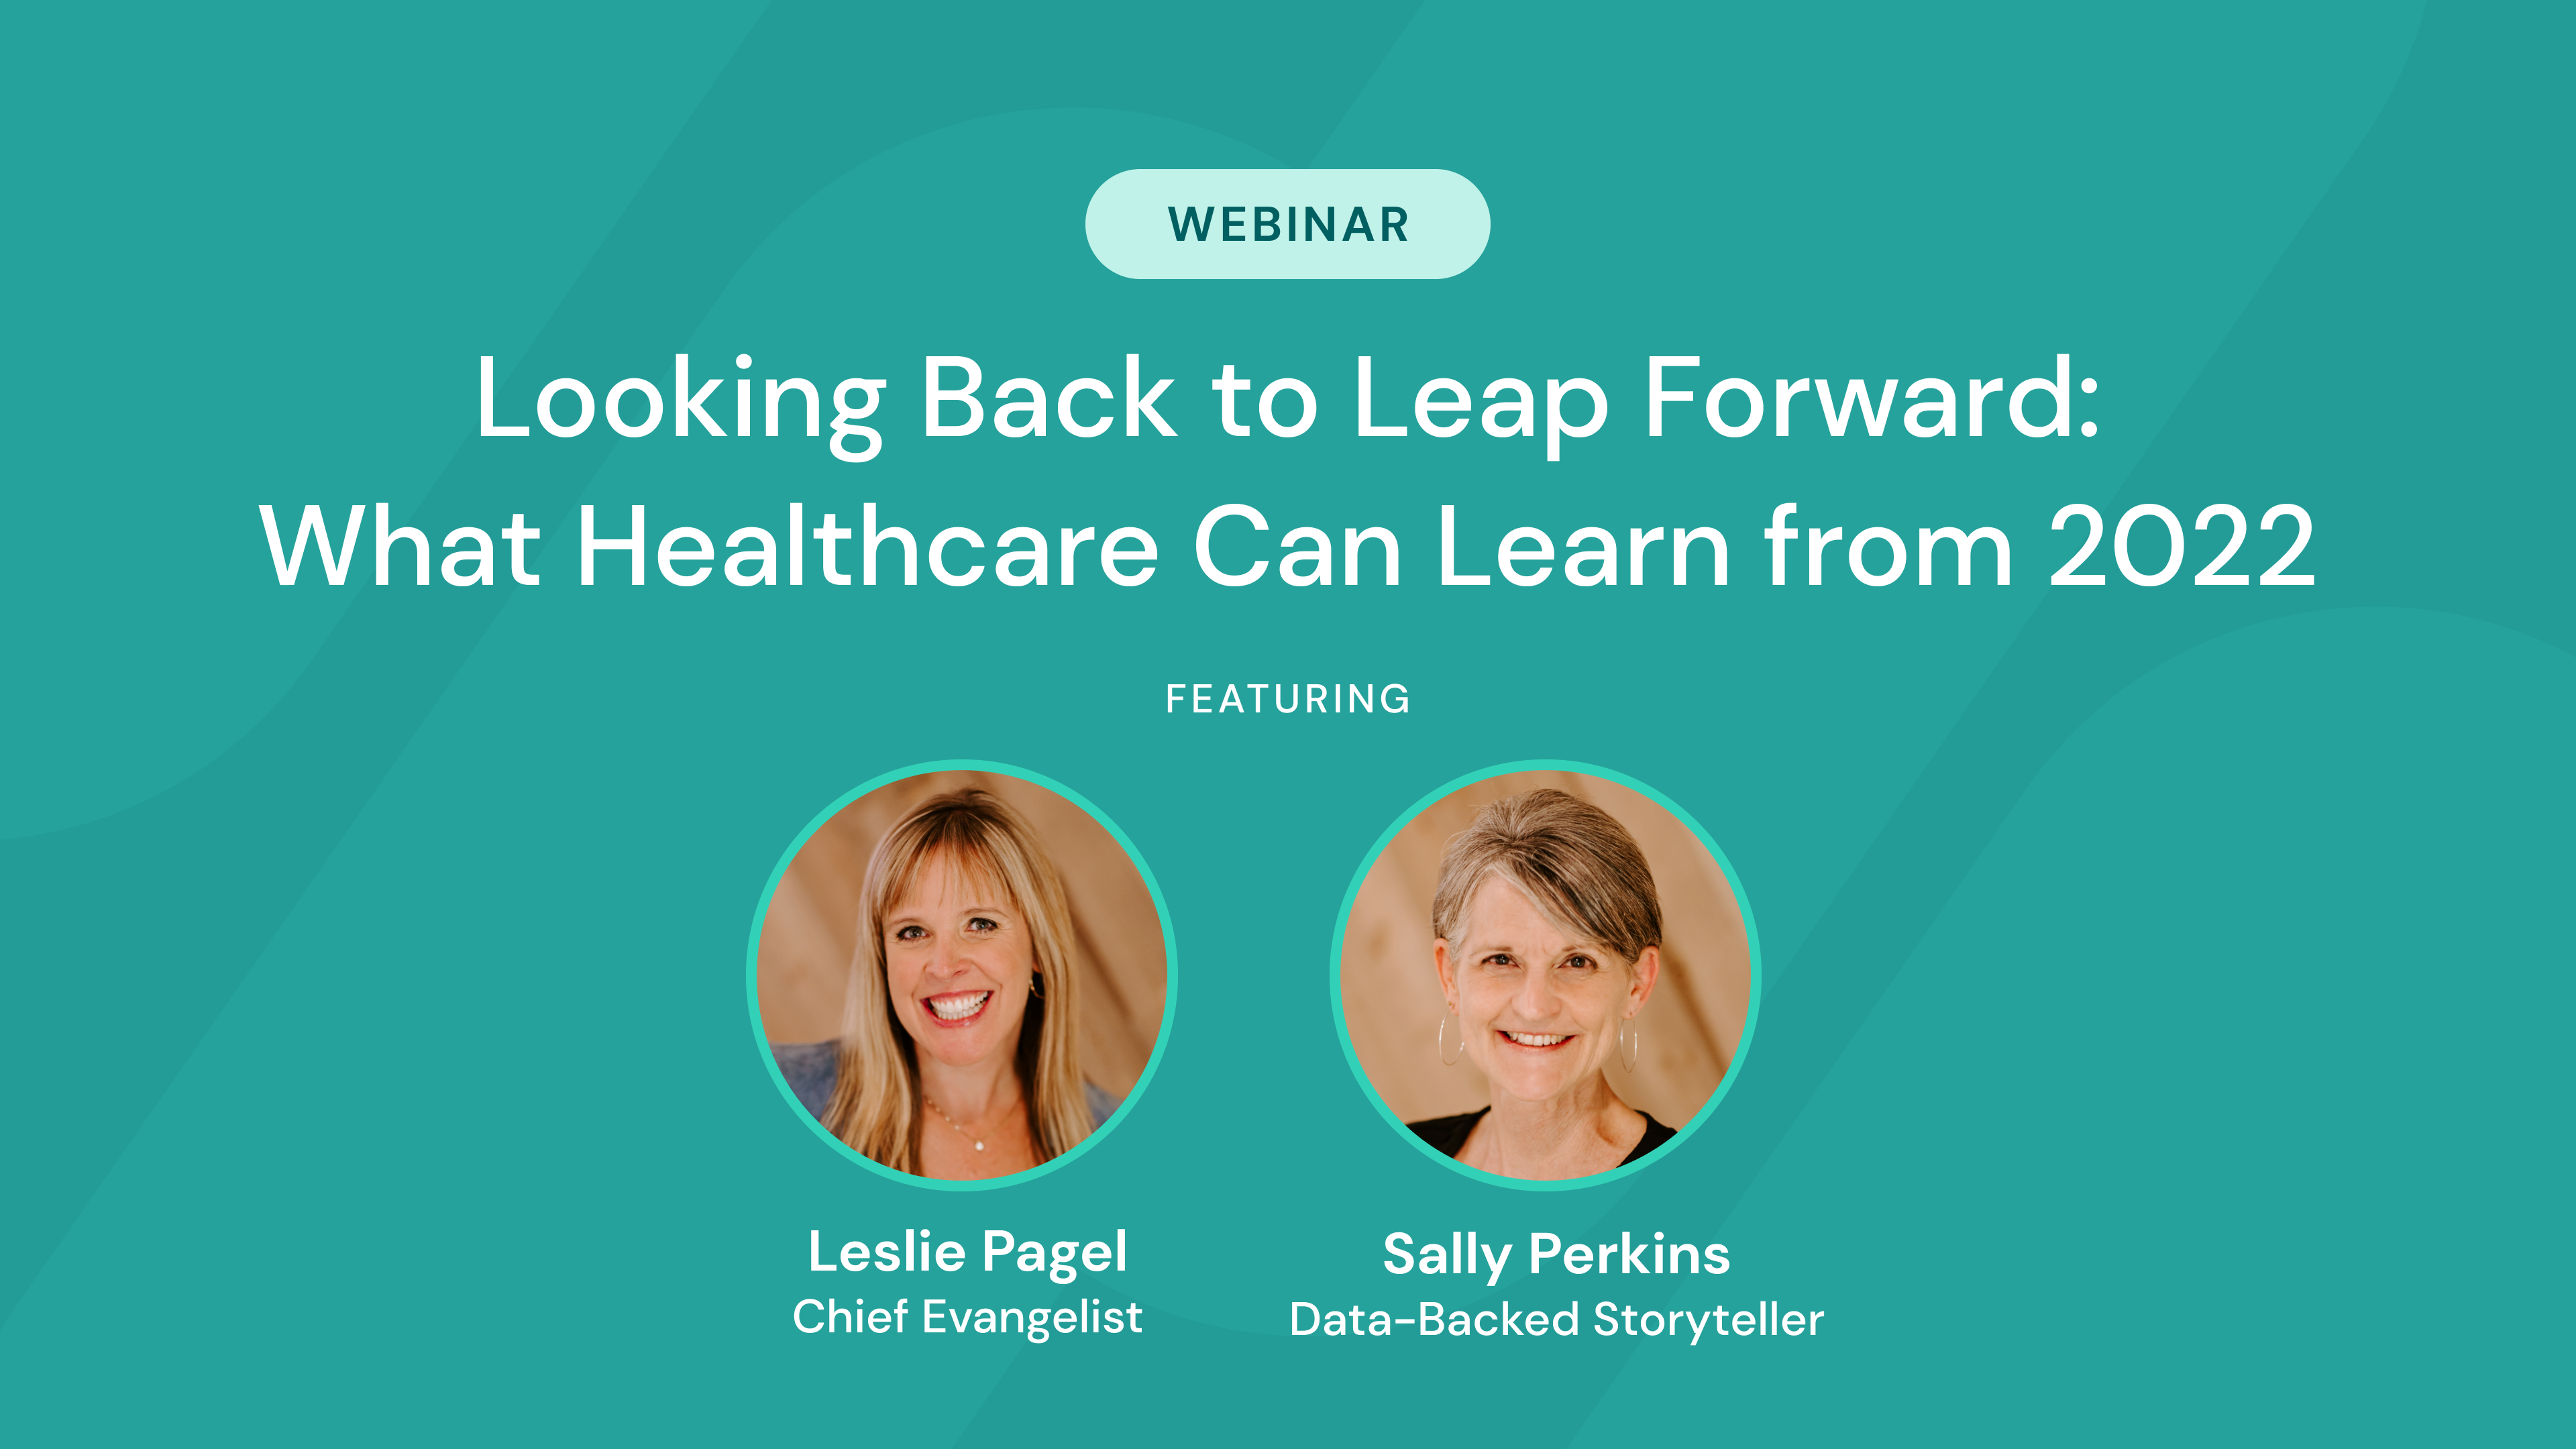 Q1-23 - Looking Back to Leap Forward Webinar | Authenticx